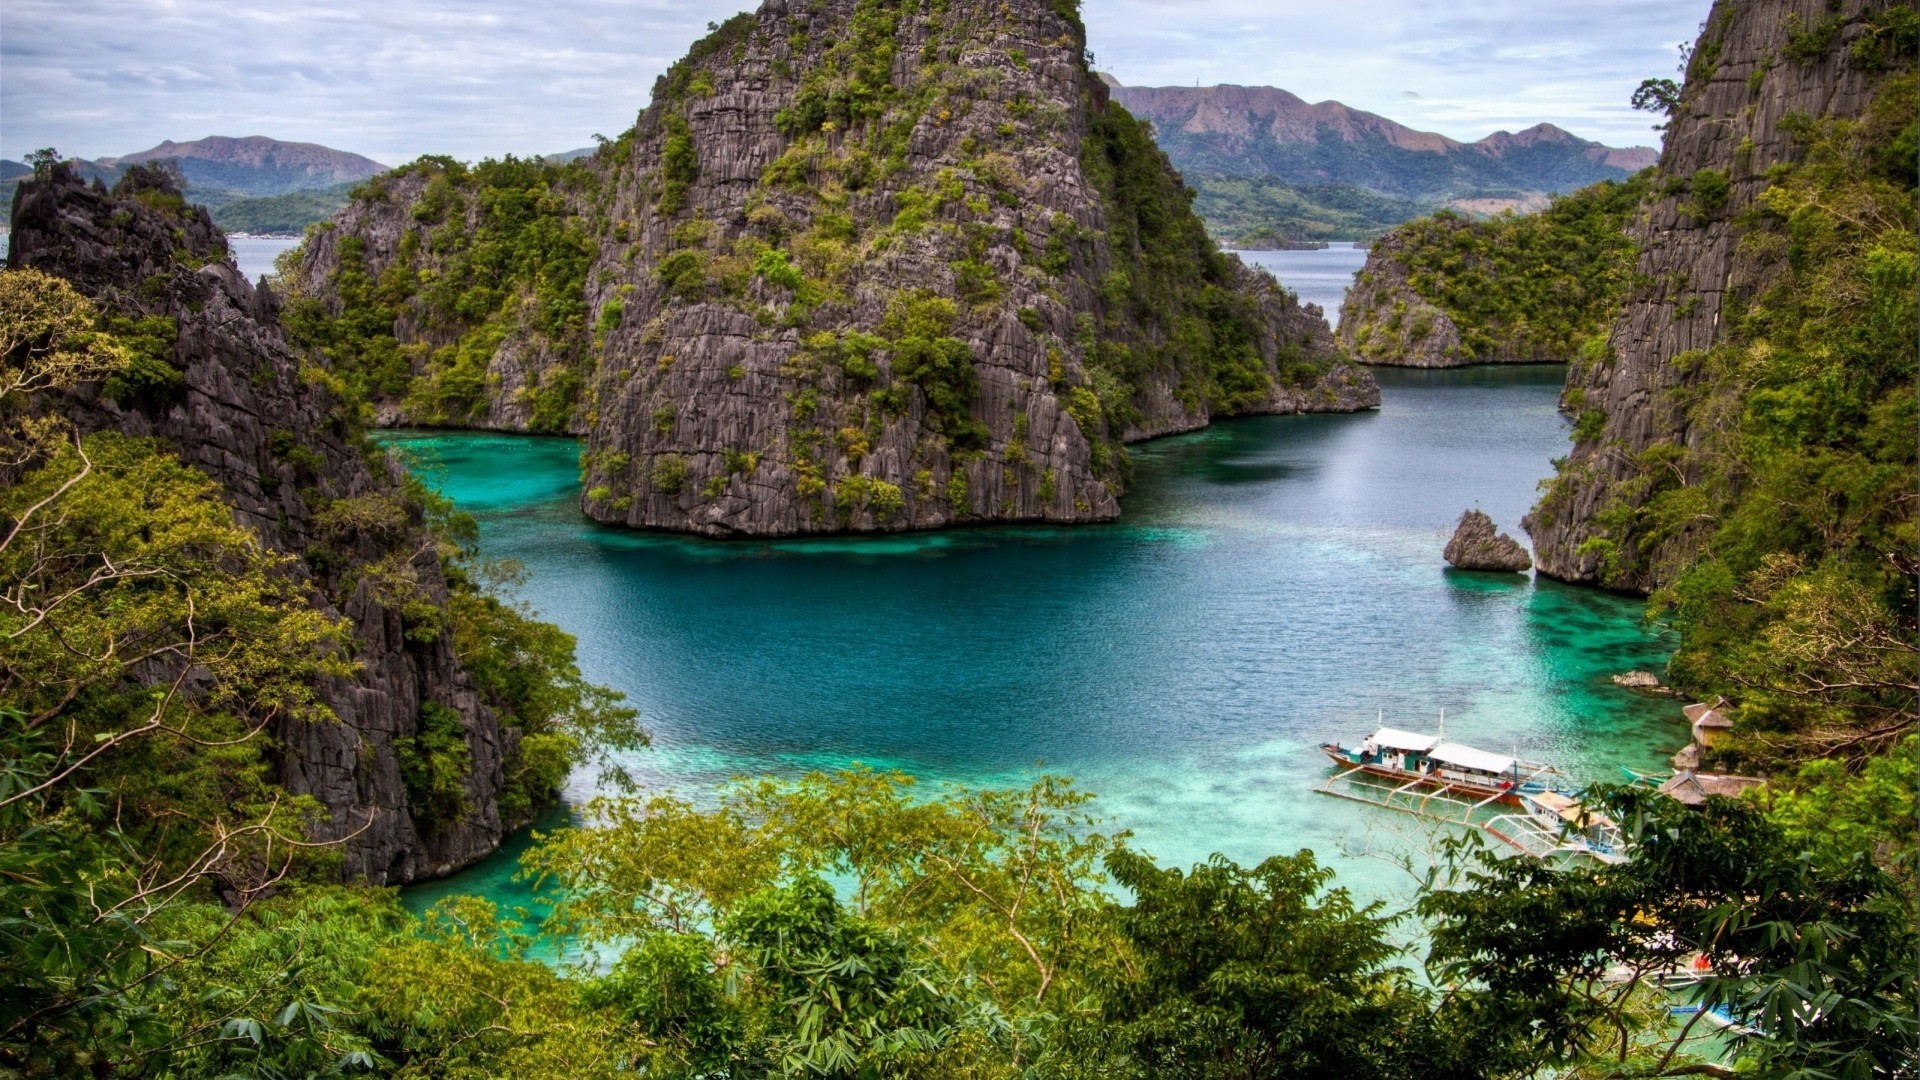 philippines wallpapers,body of water,natural landscape,nature,water resources,nature reserve